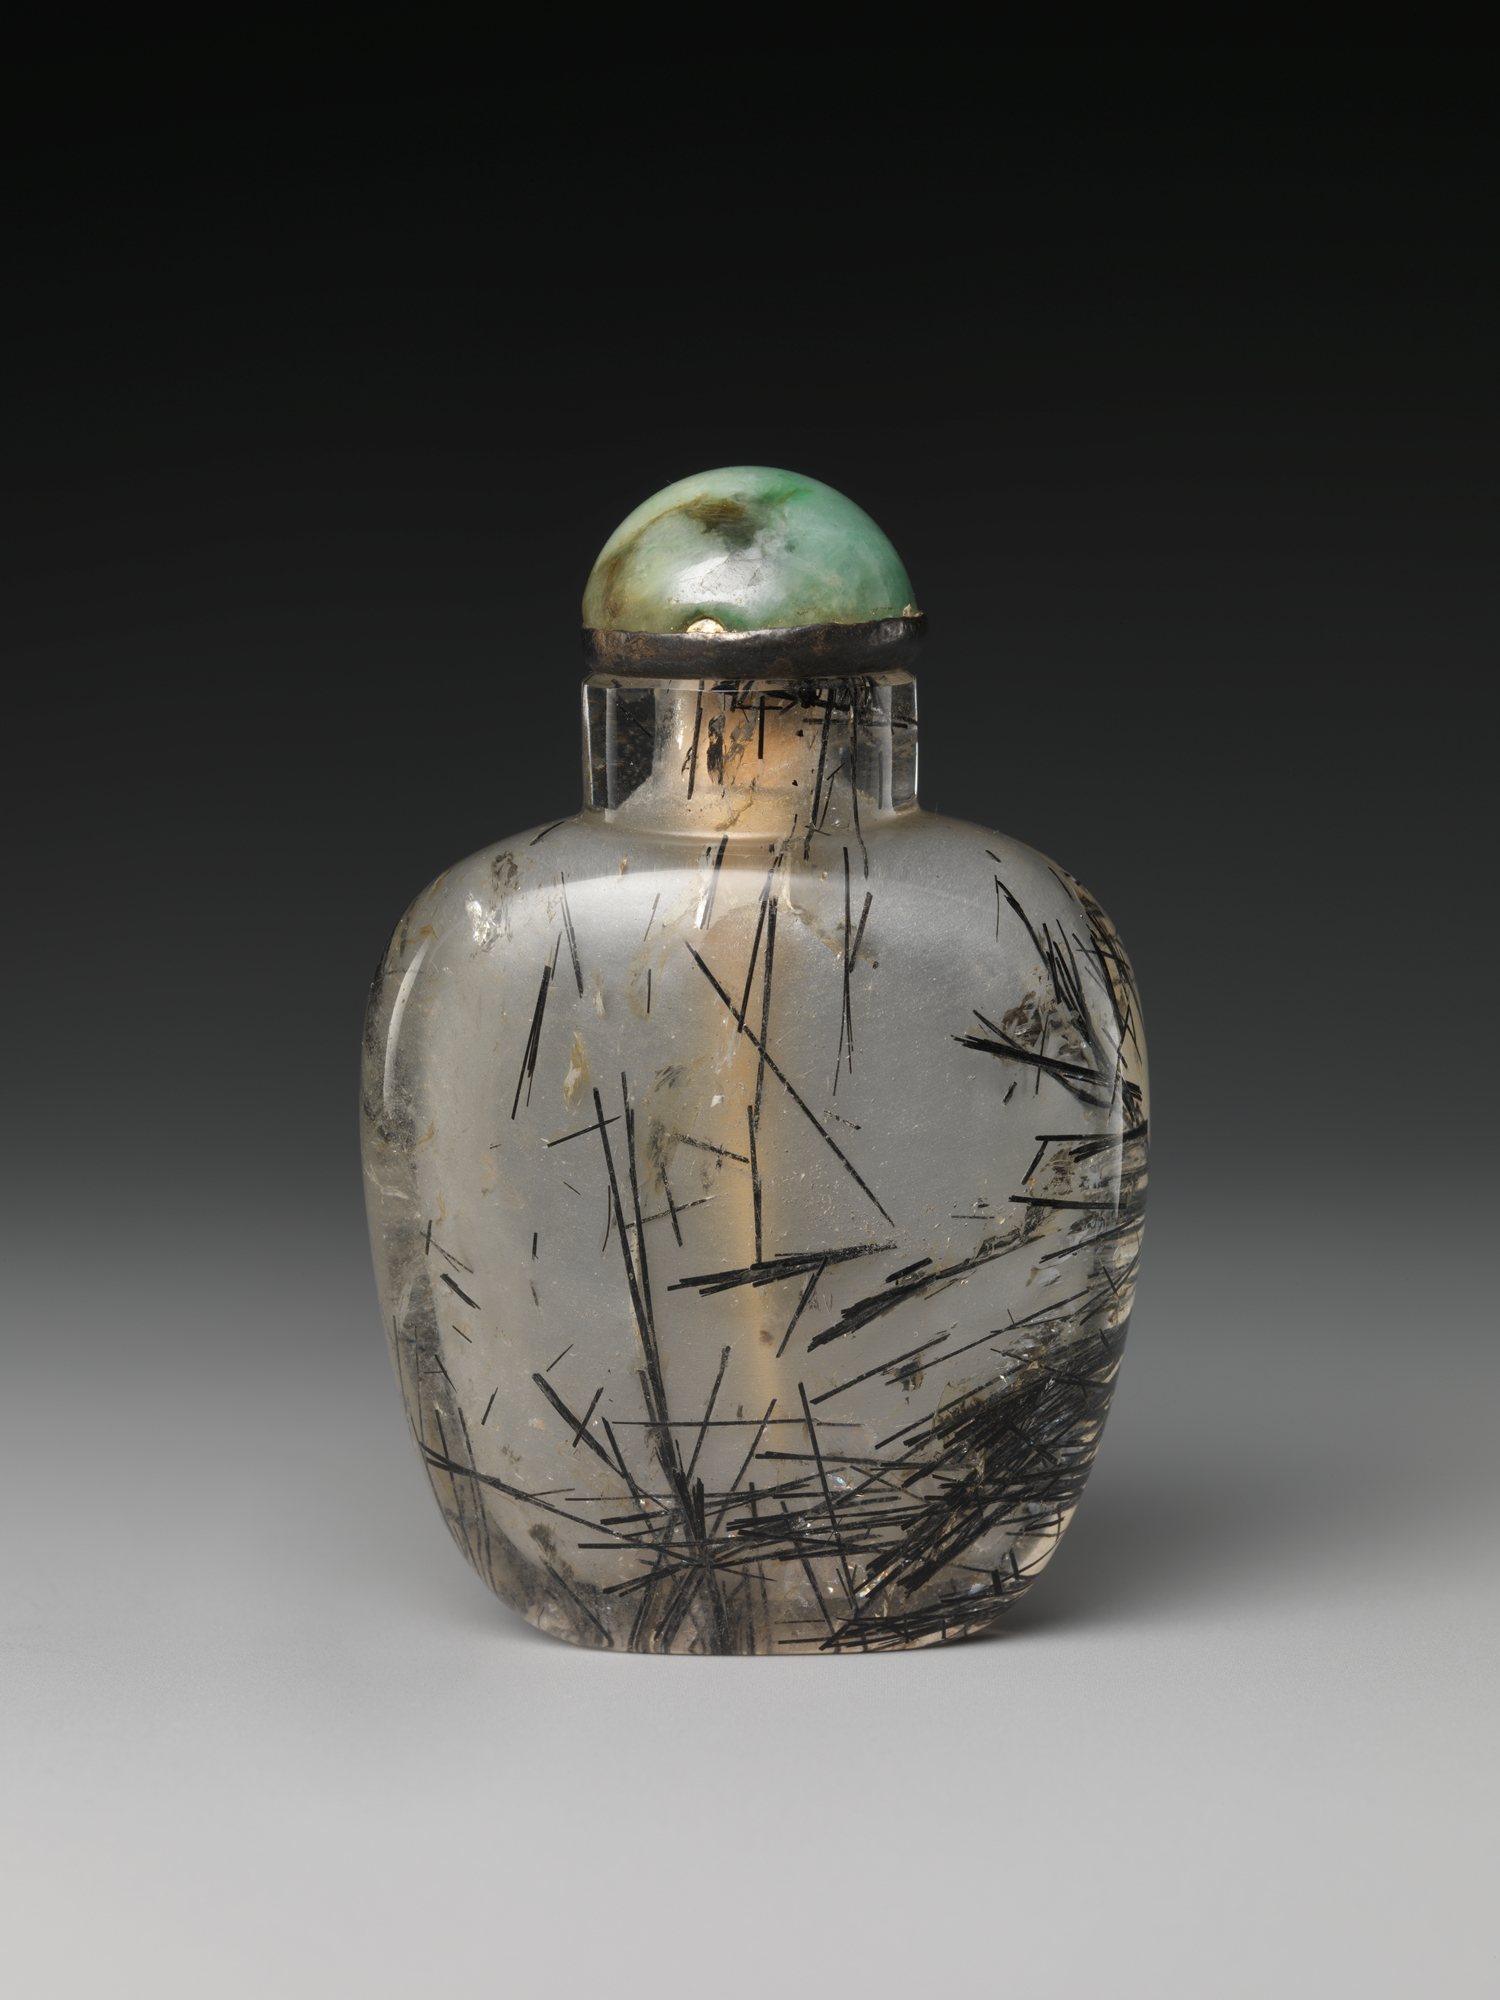 Snuff Bottle, China, Qing dynasty (1644–1911)